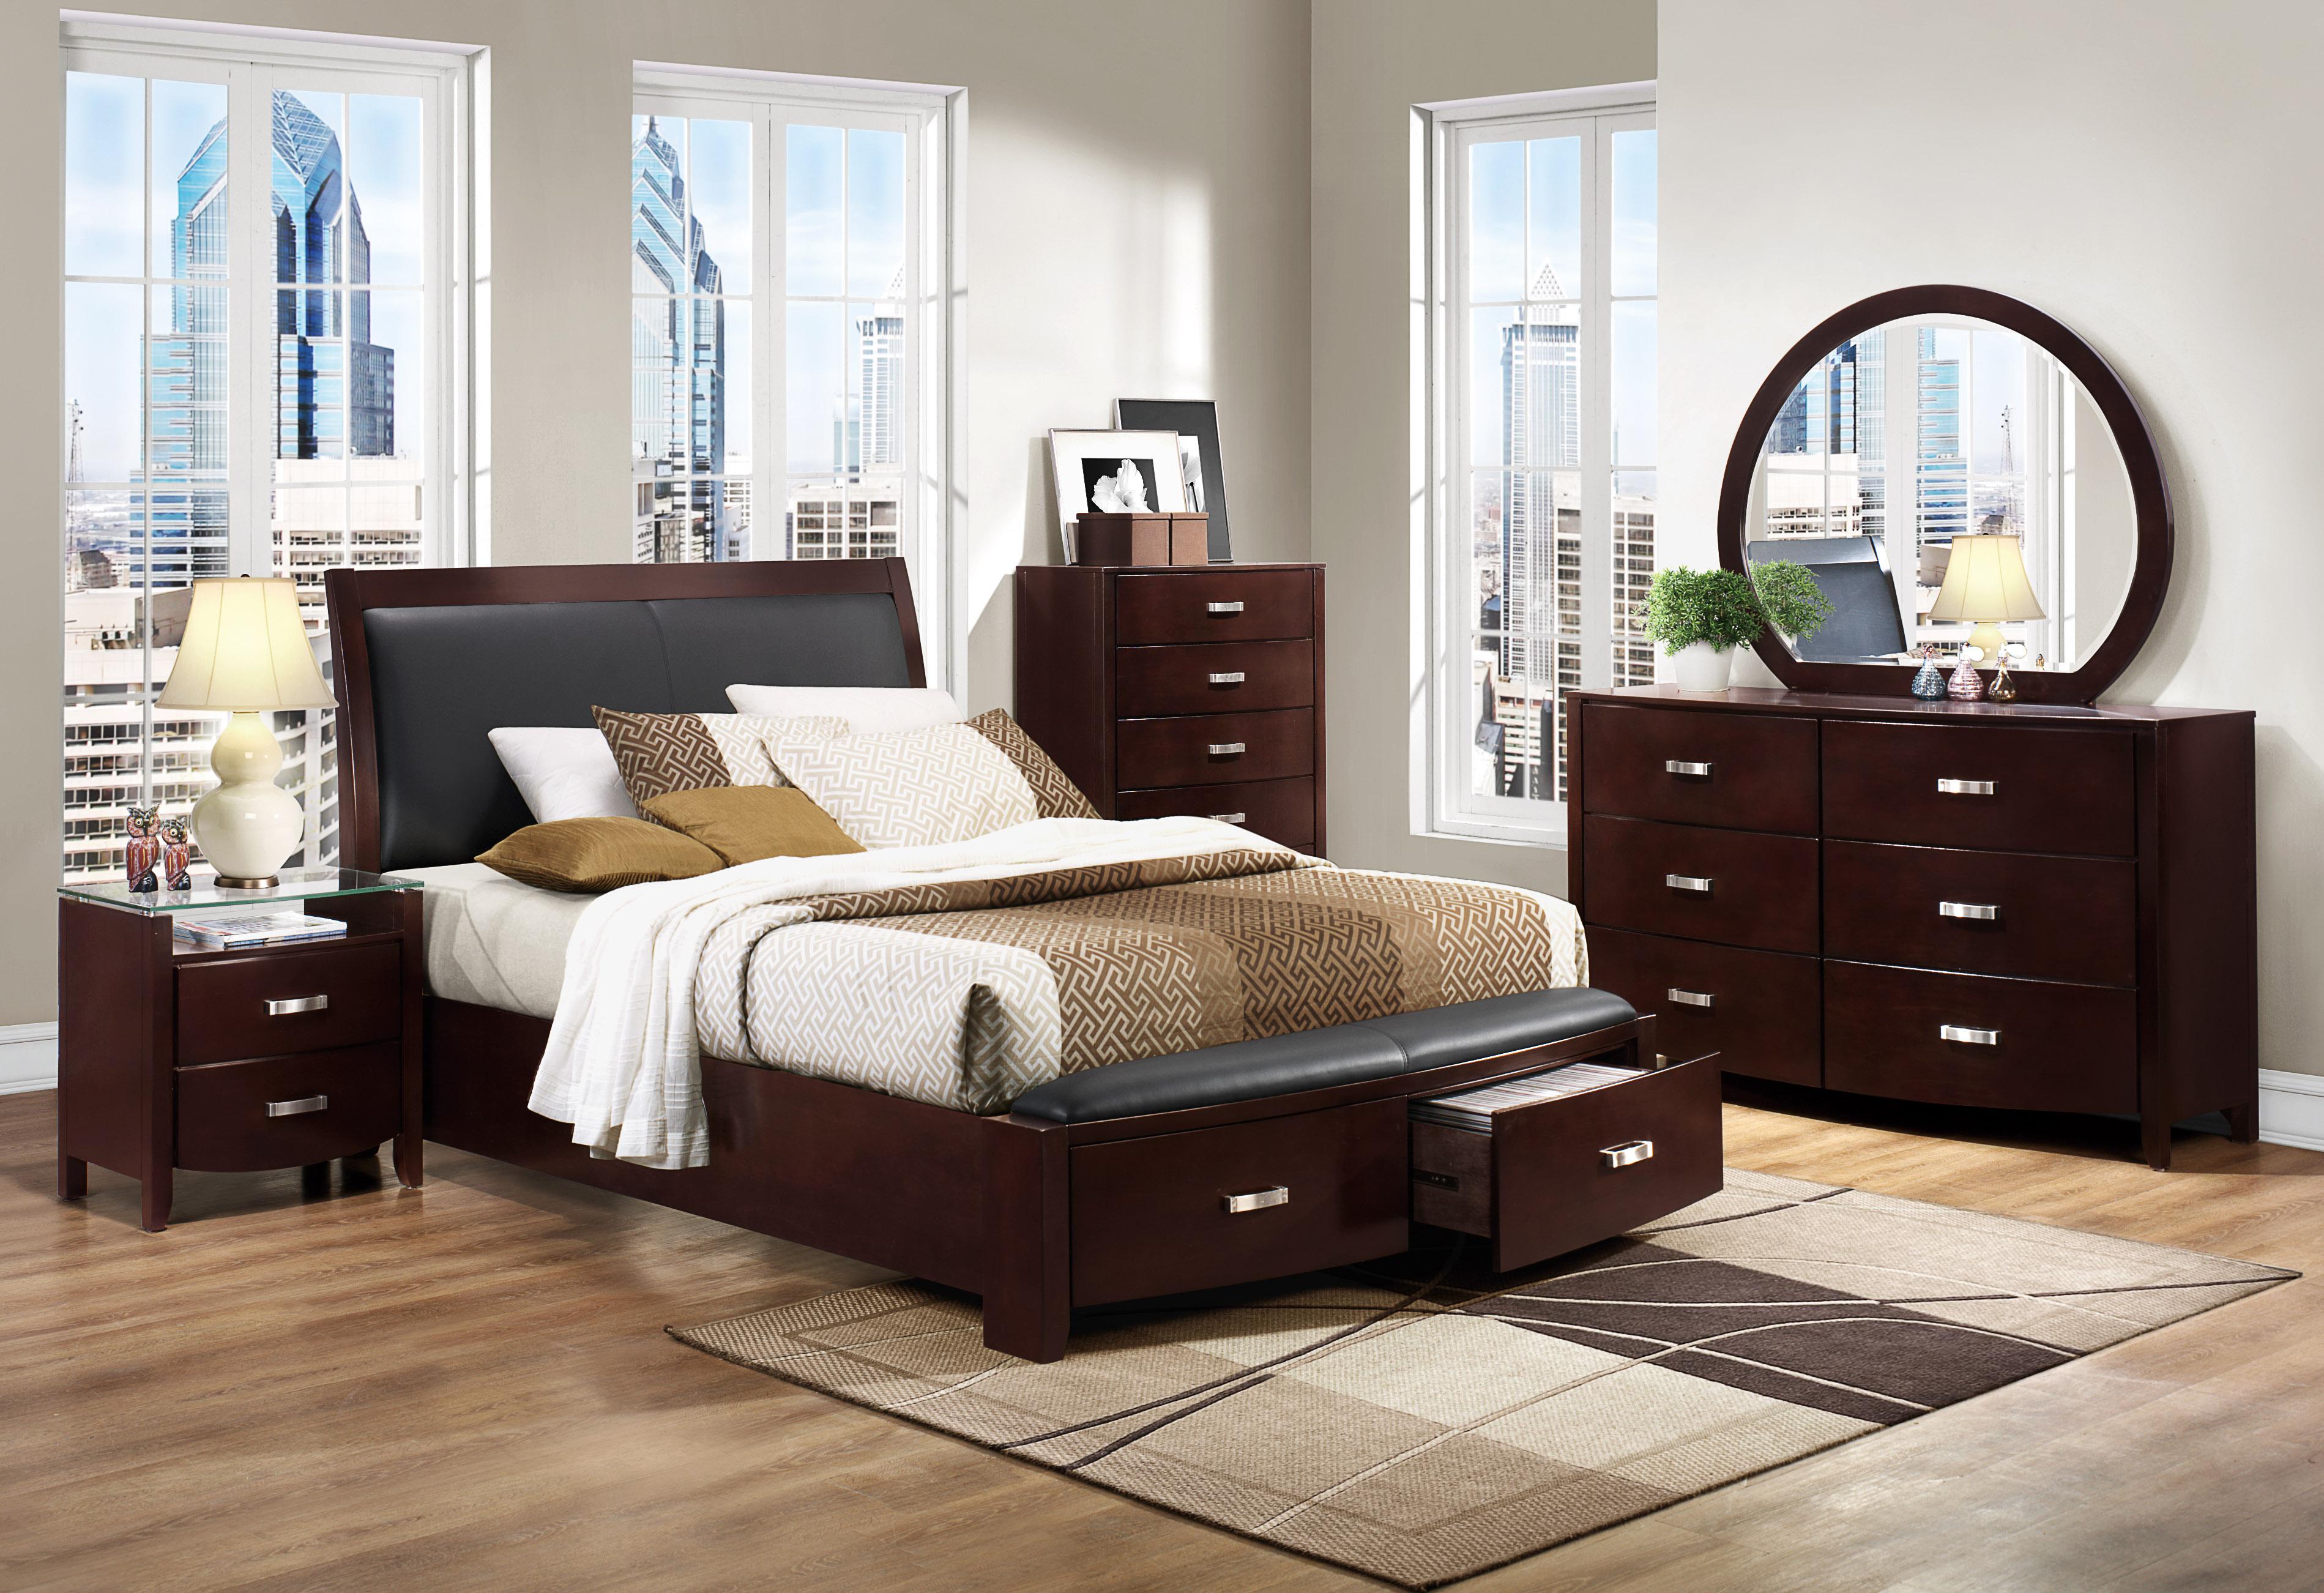 Contemporary Bedroom Set 1737KNC-1CK-5PC Lyric 1737KNC-1CK-5PC in Dark Cherry Faux Leather